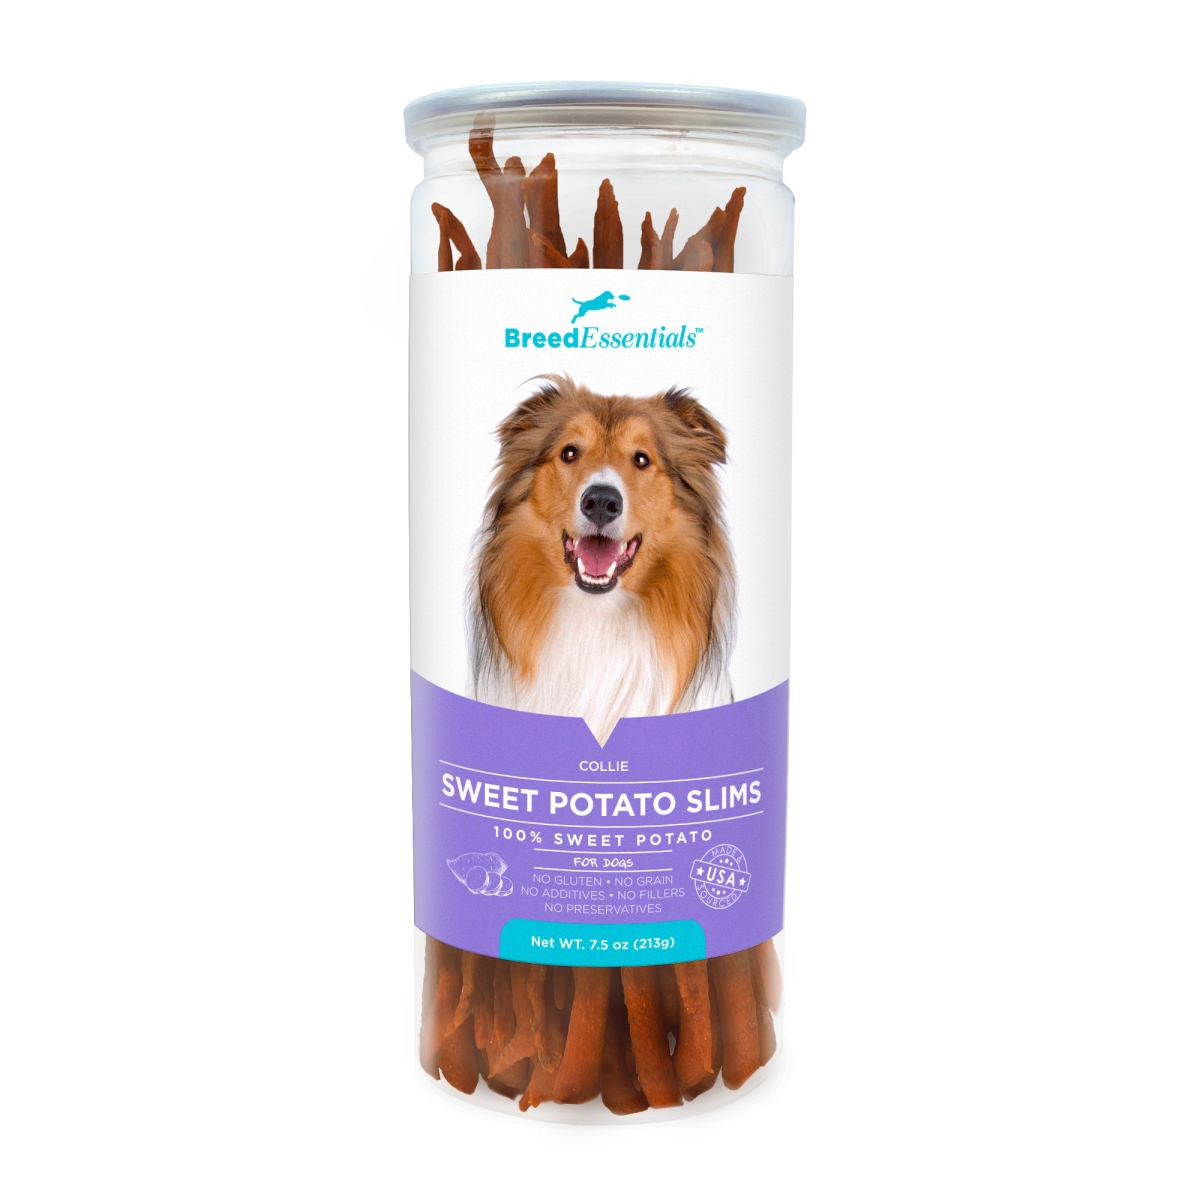 Picture of Breed Essentials 197247002109 7.5 oz Sweet Potato Slims - Collie